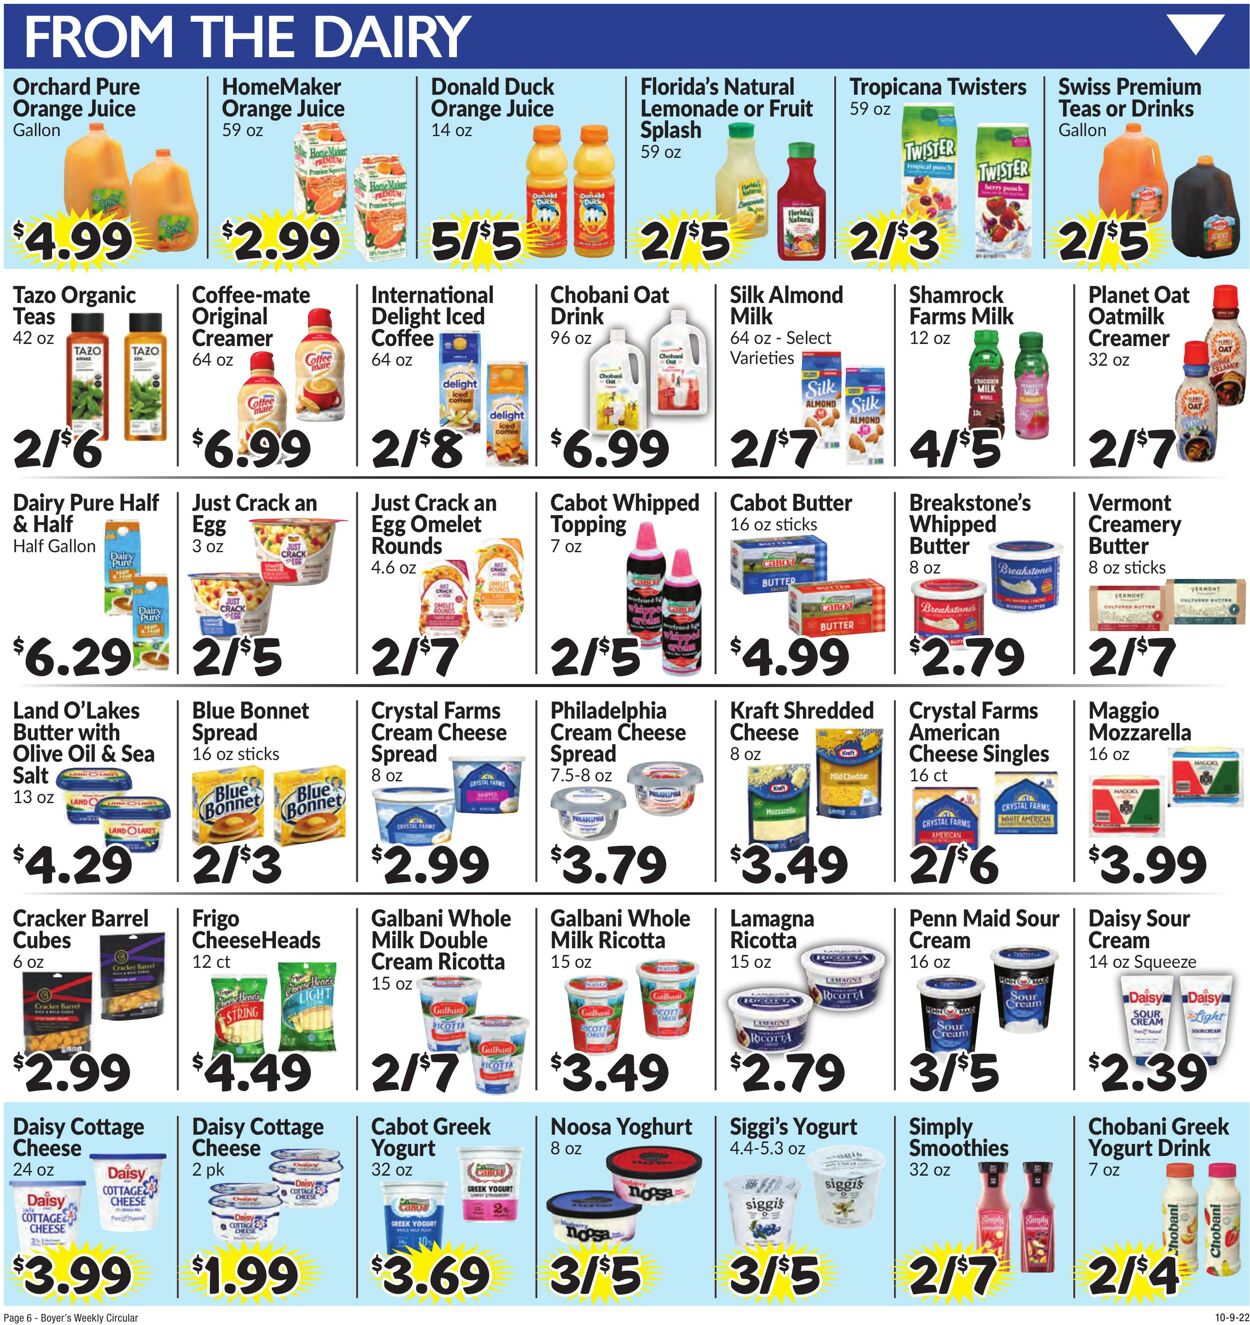 Weekly ad Boyer's 10/09/2022 - 10/15/2022